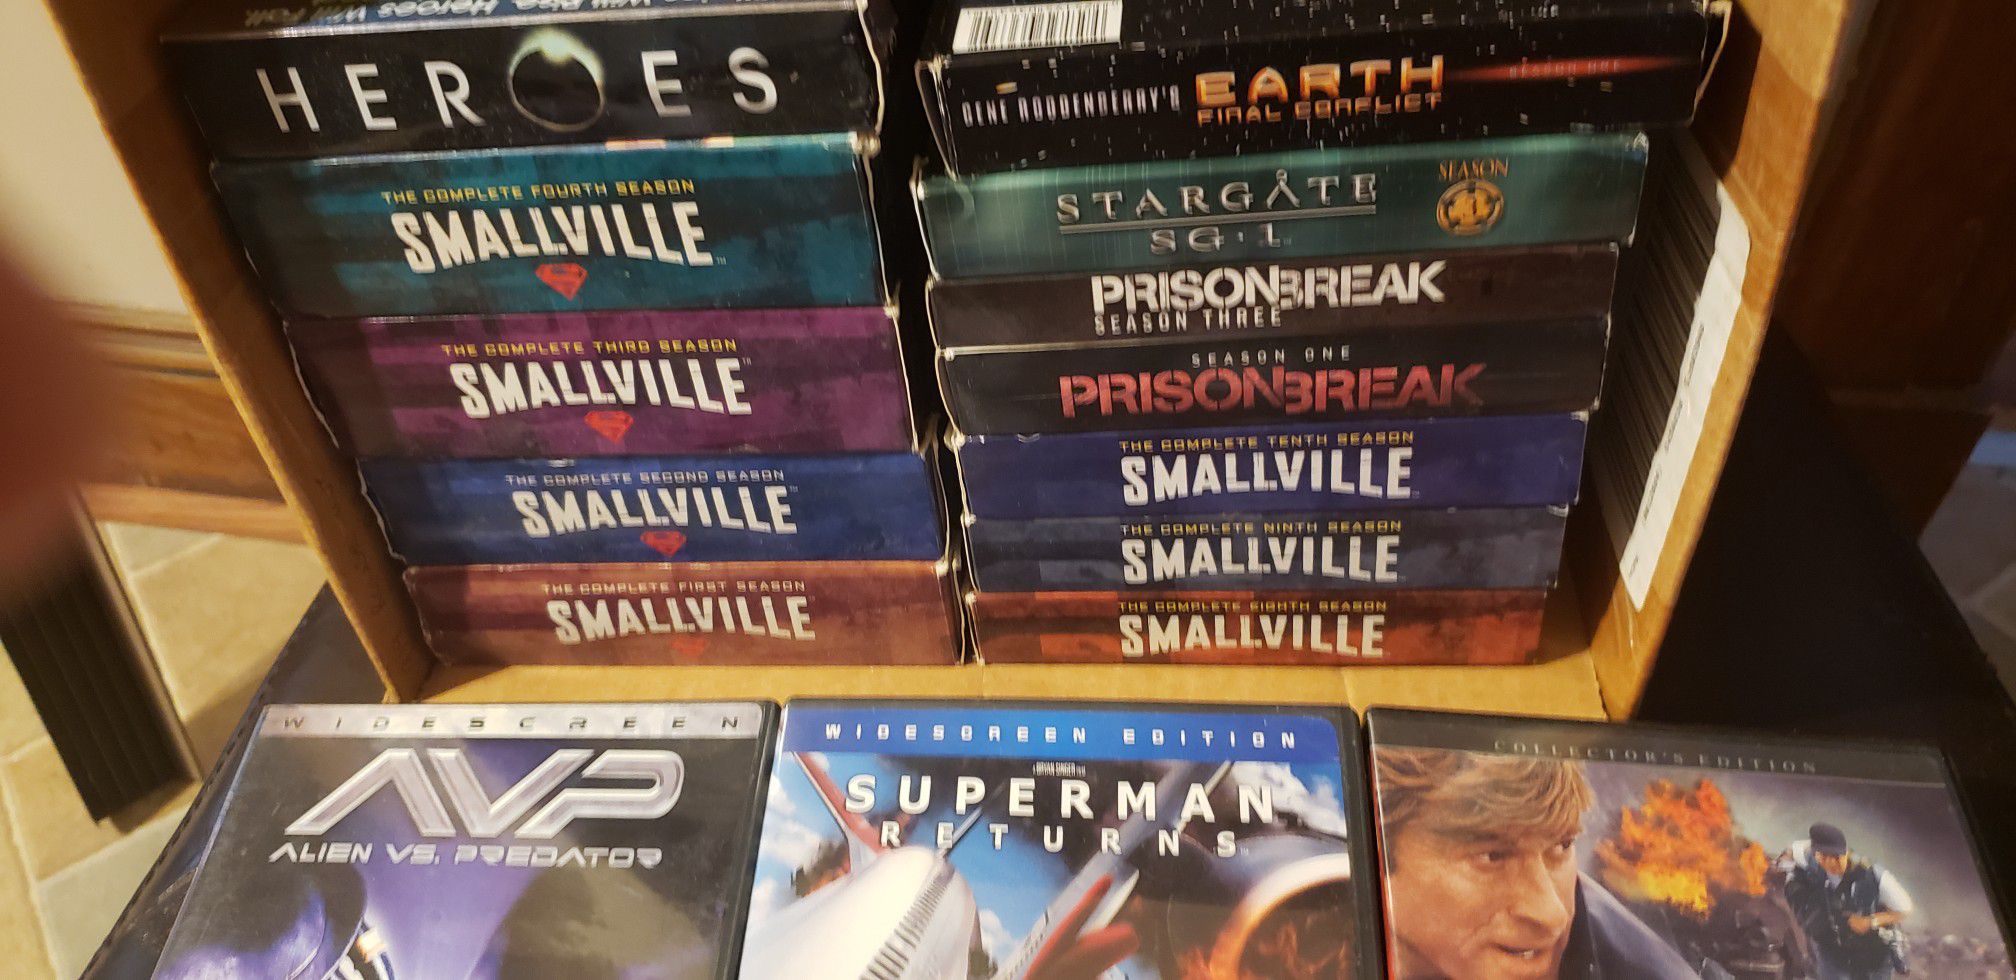 Smallville, heroes, Prison Break and star gate full season And movies